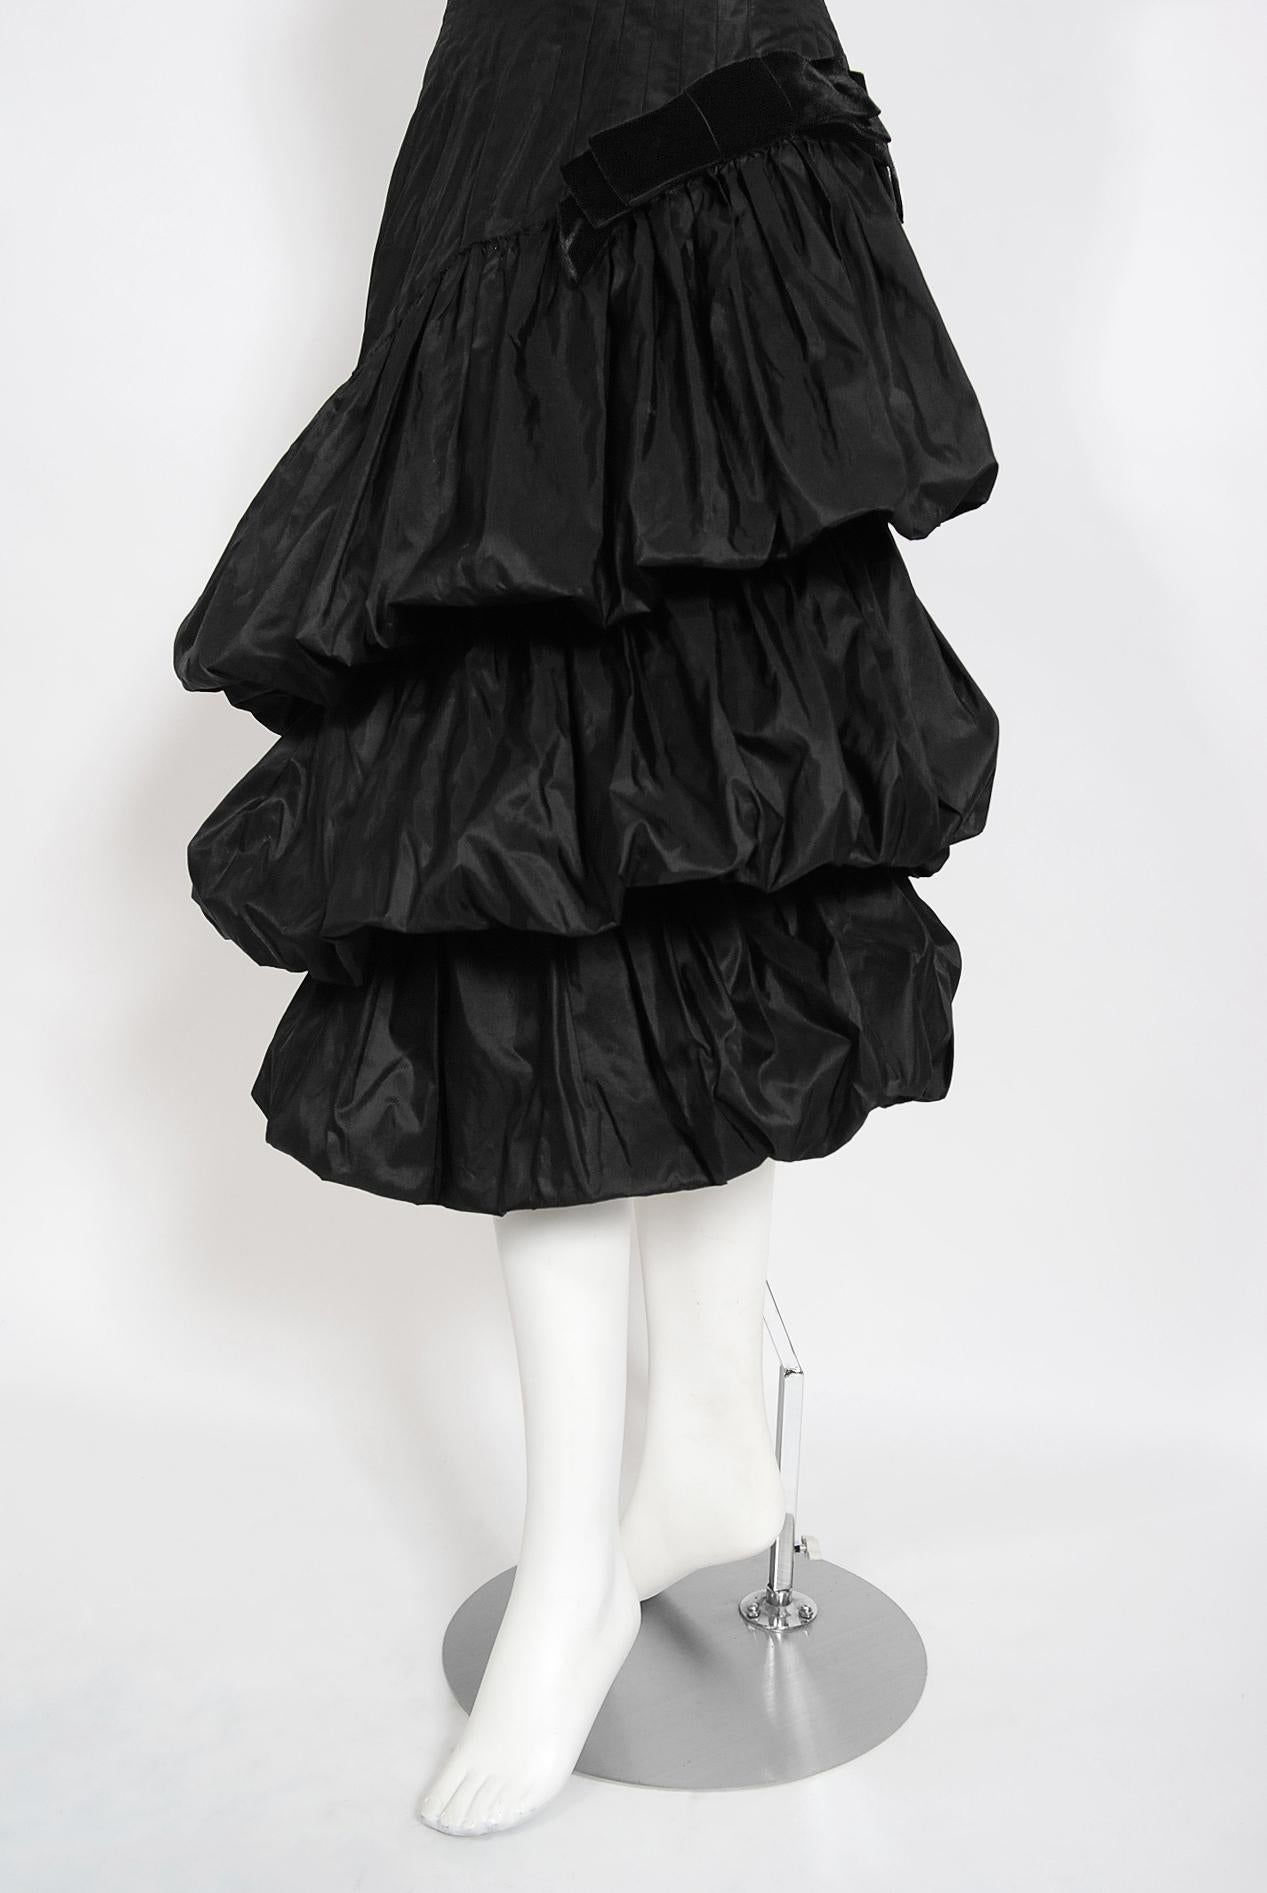 Vintage 1959 Bruxelles Couture Black Taffeta Tiered-Puff Strapless Dress  4